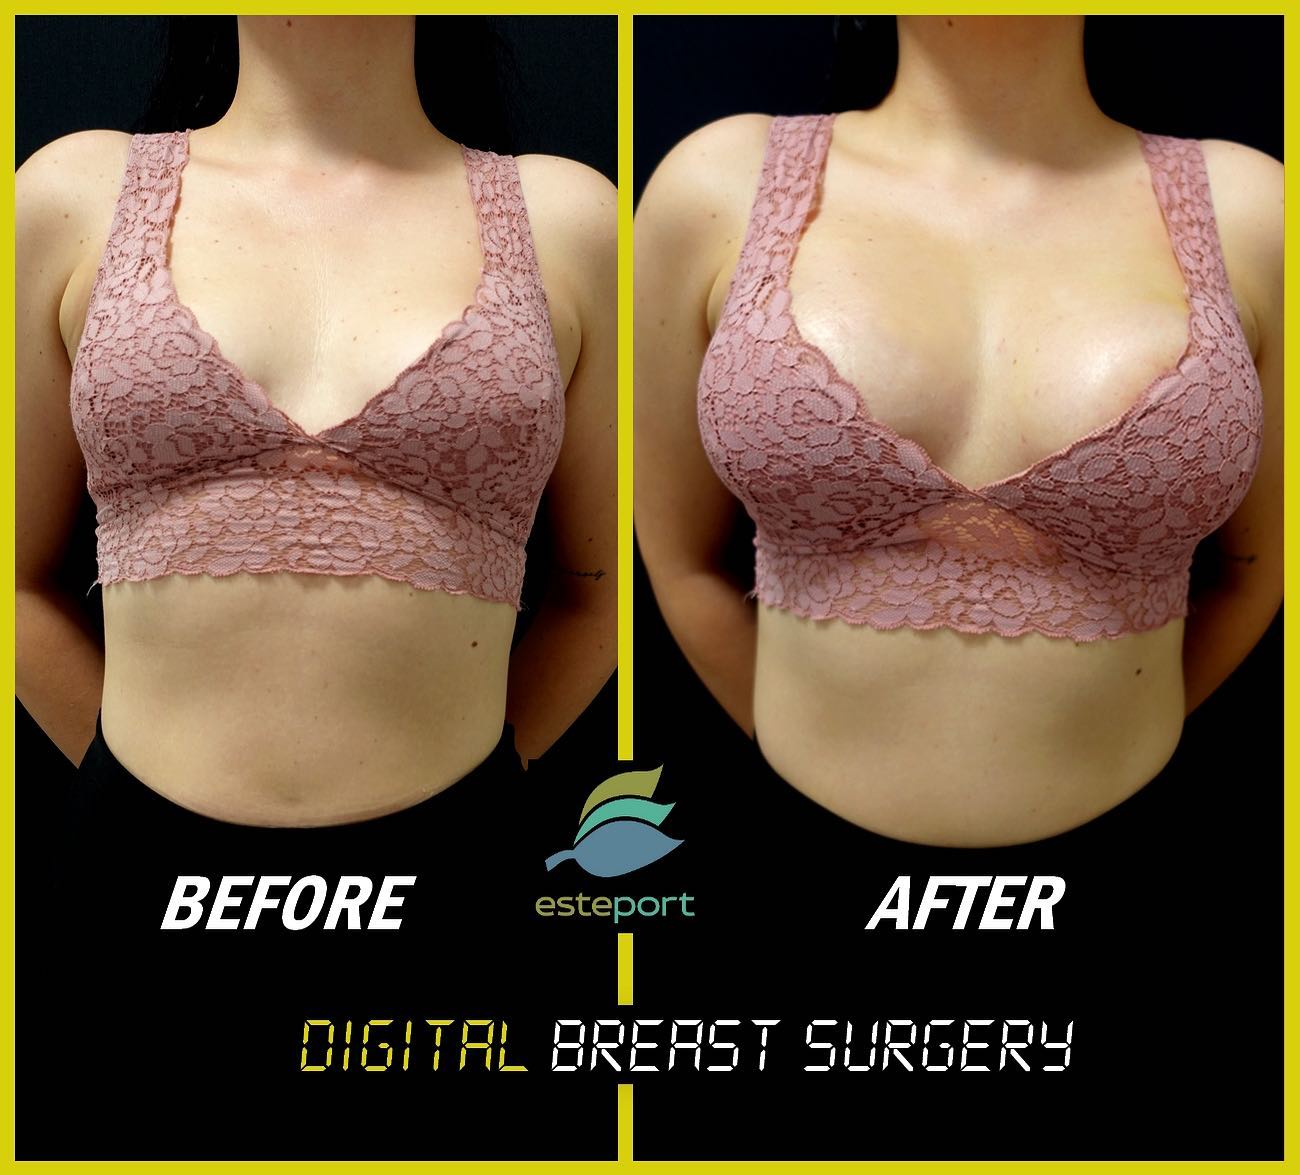 When To Get Breast Augmentation After Having Uneven Breast Sizes